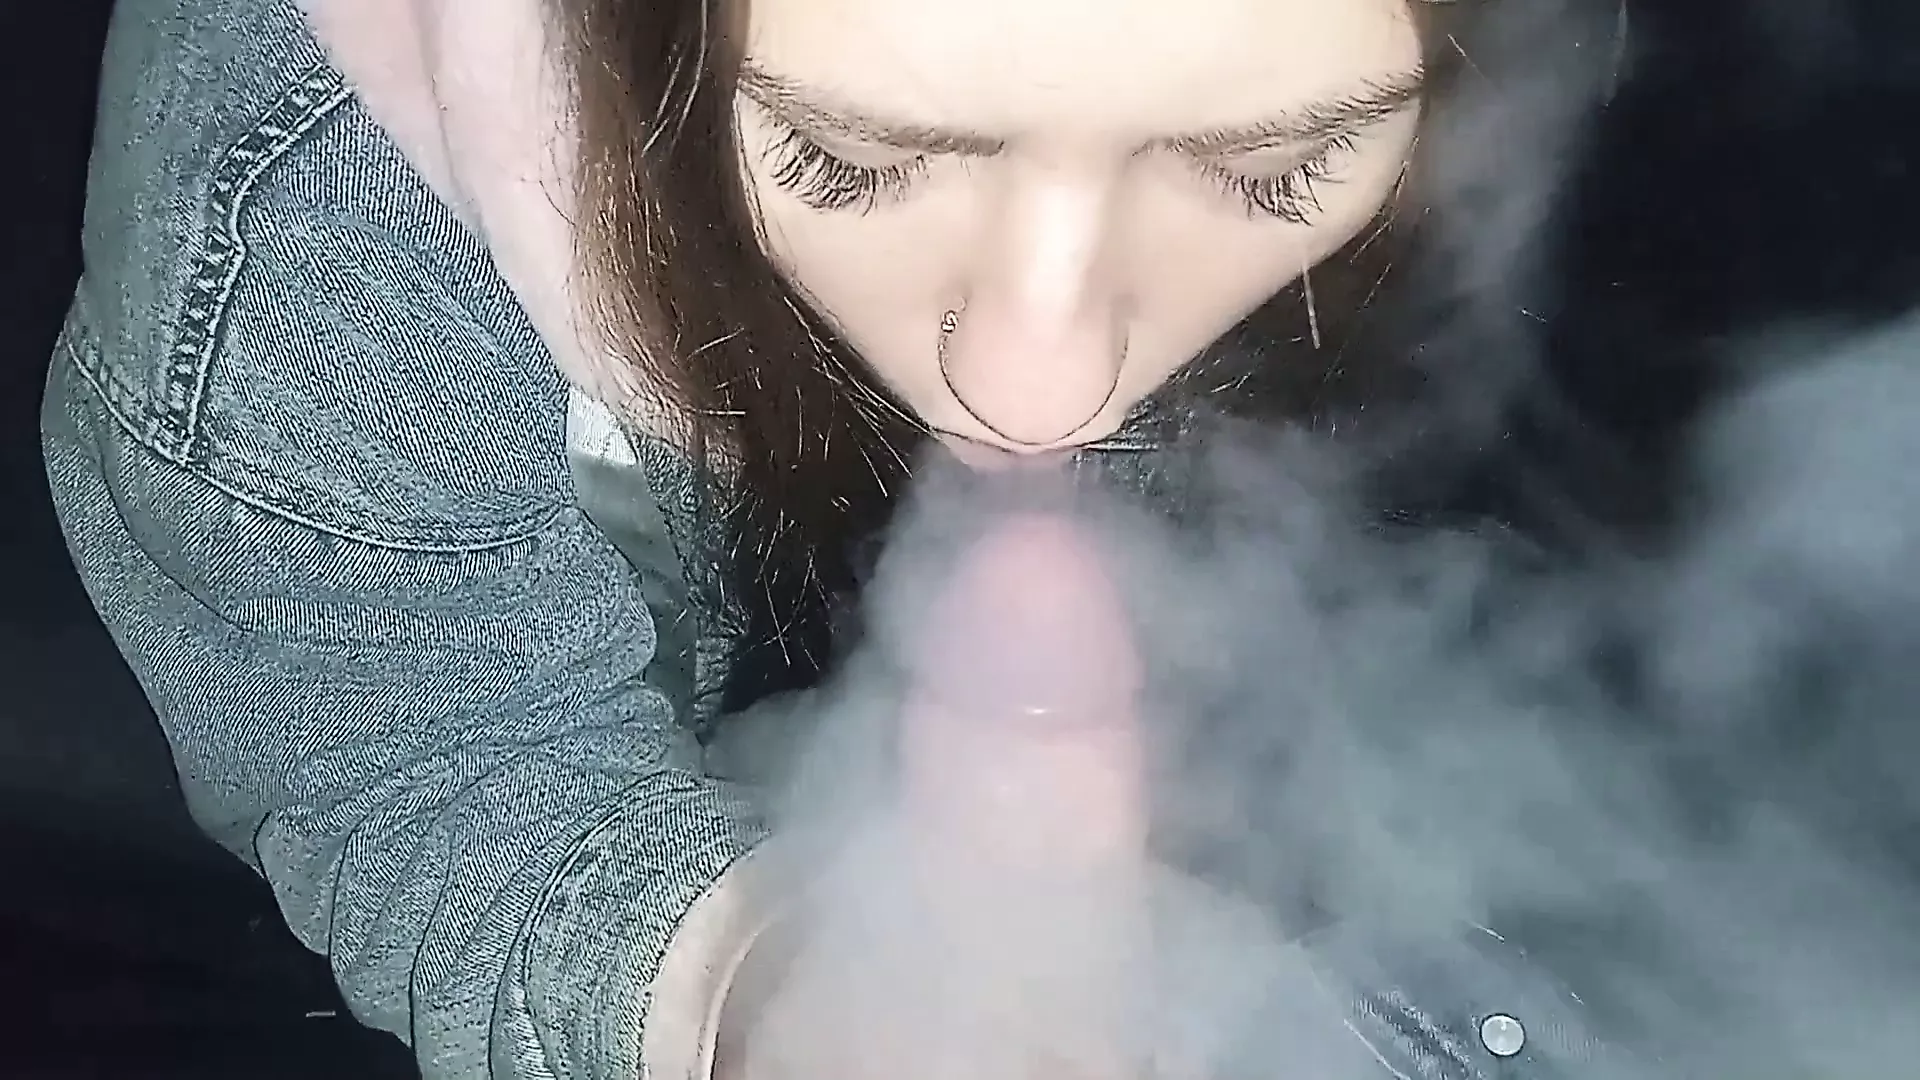 She loves to suck cock and smoke cigarettes!